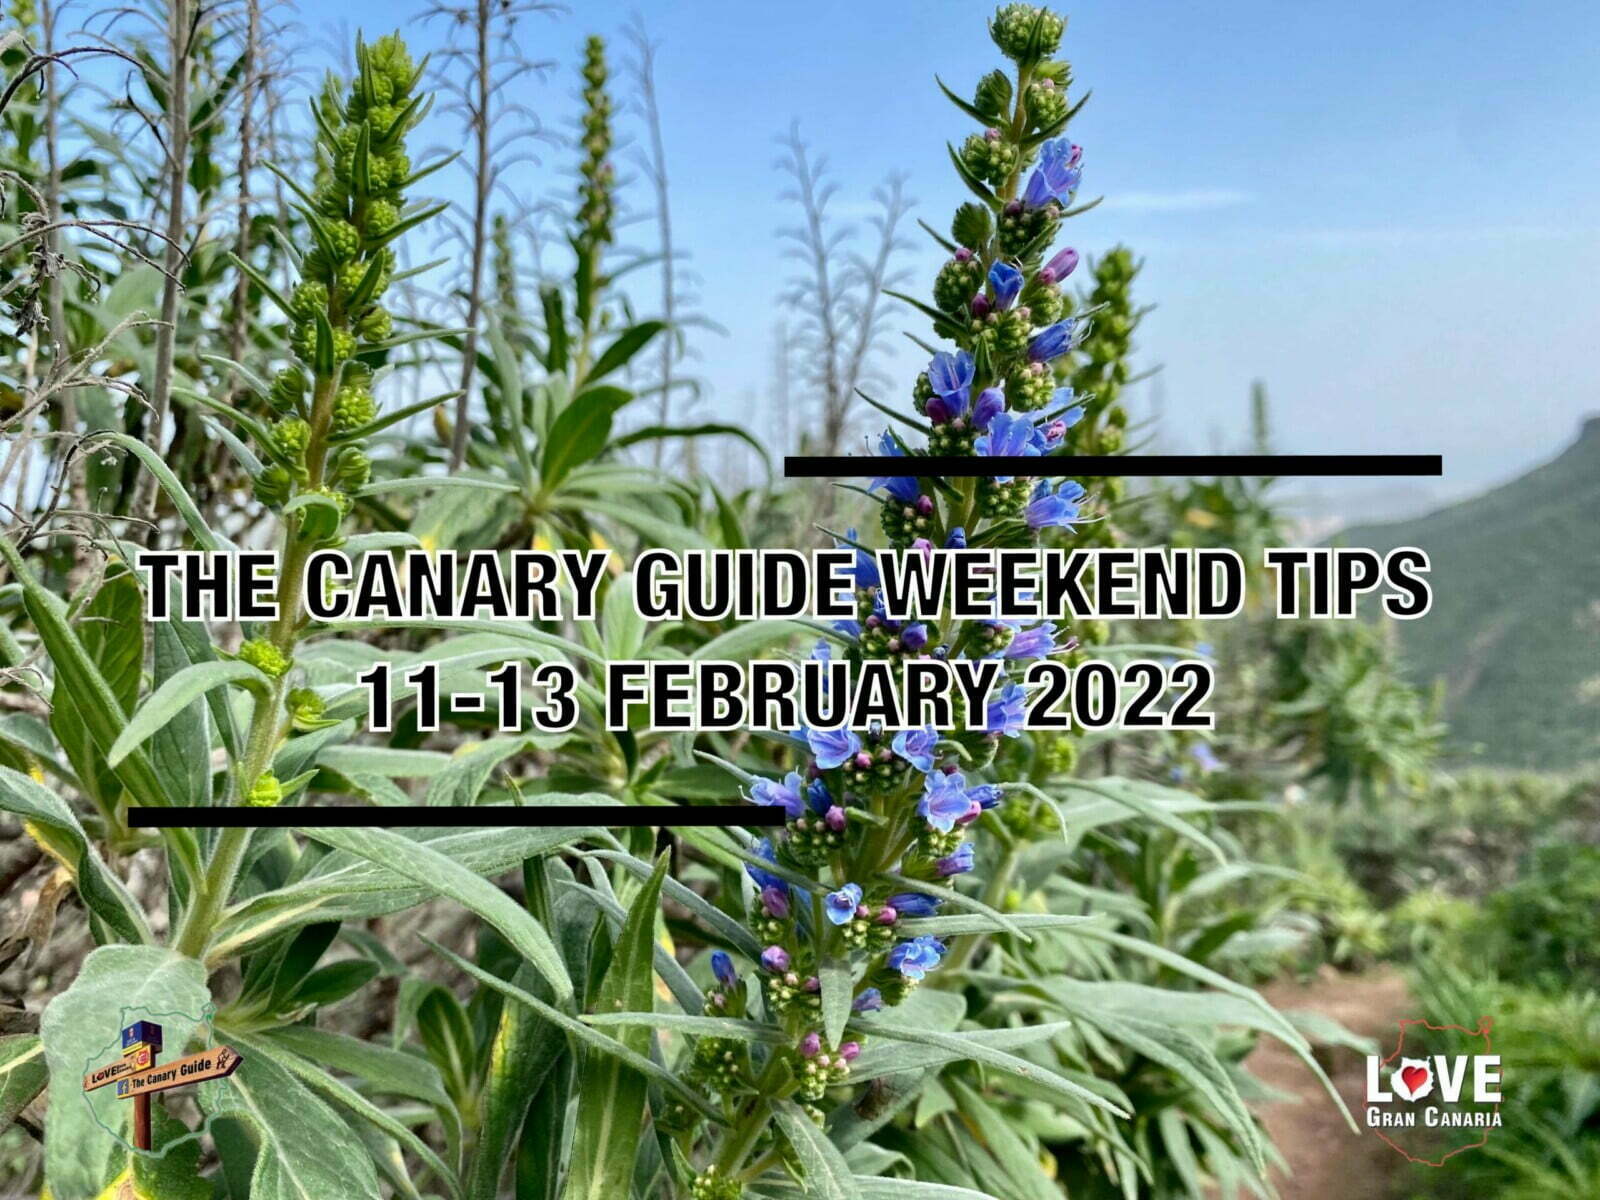 The Canary Guide #WeekendTips 11-13 February 2022